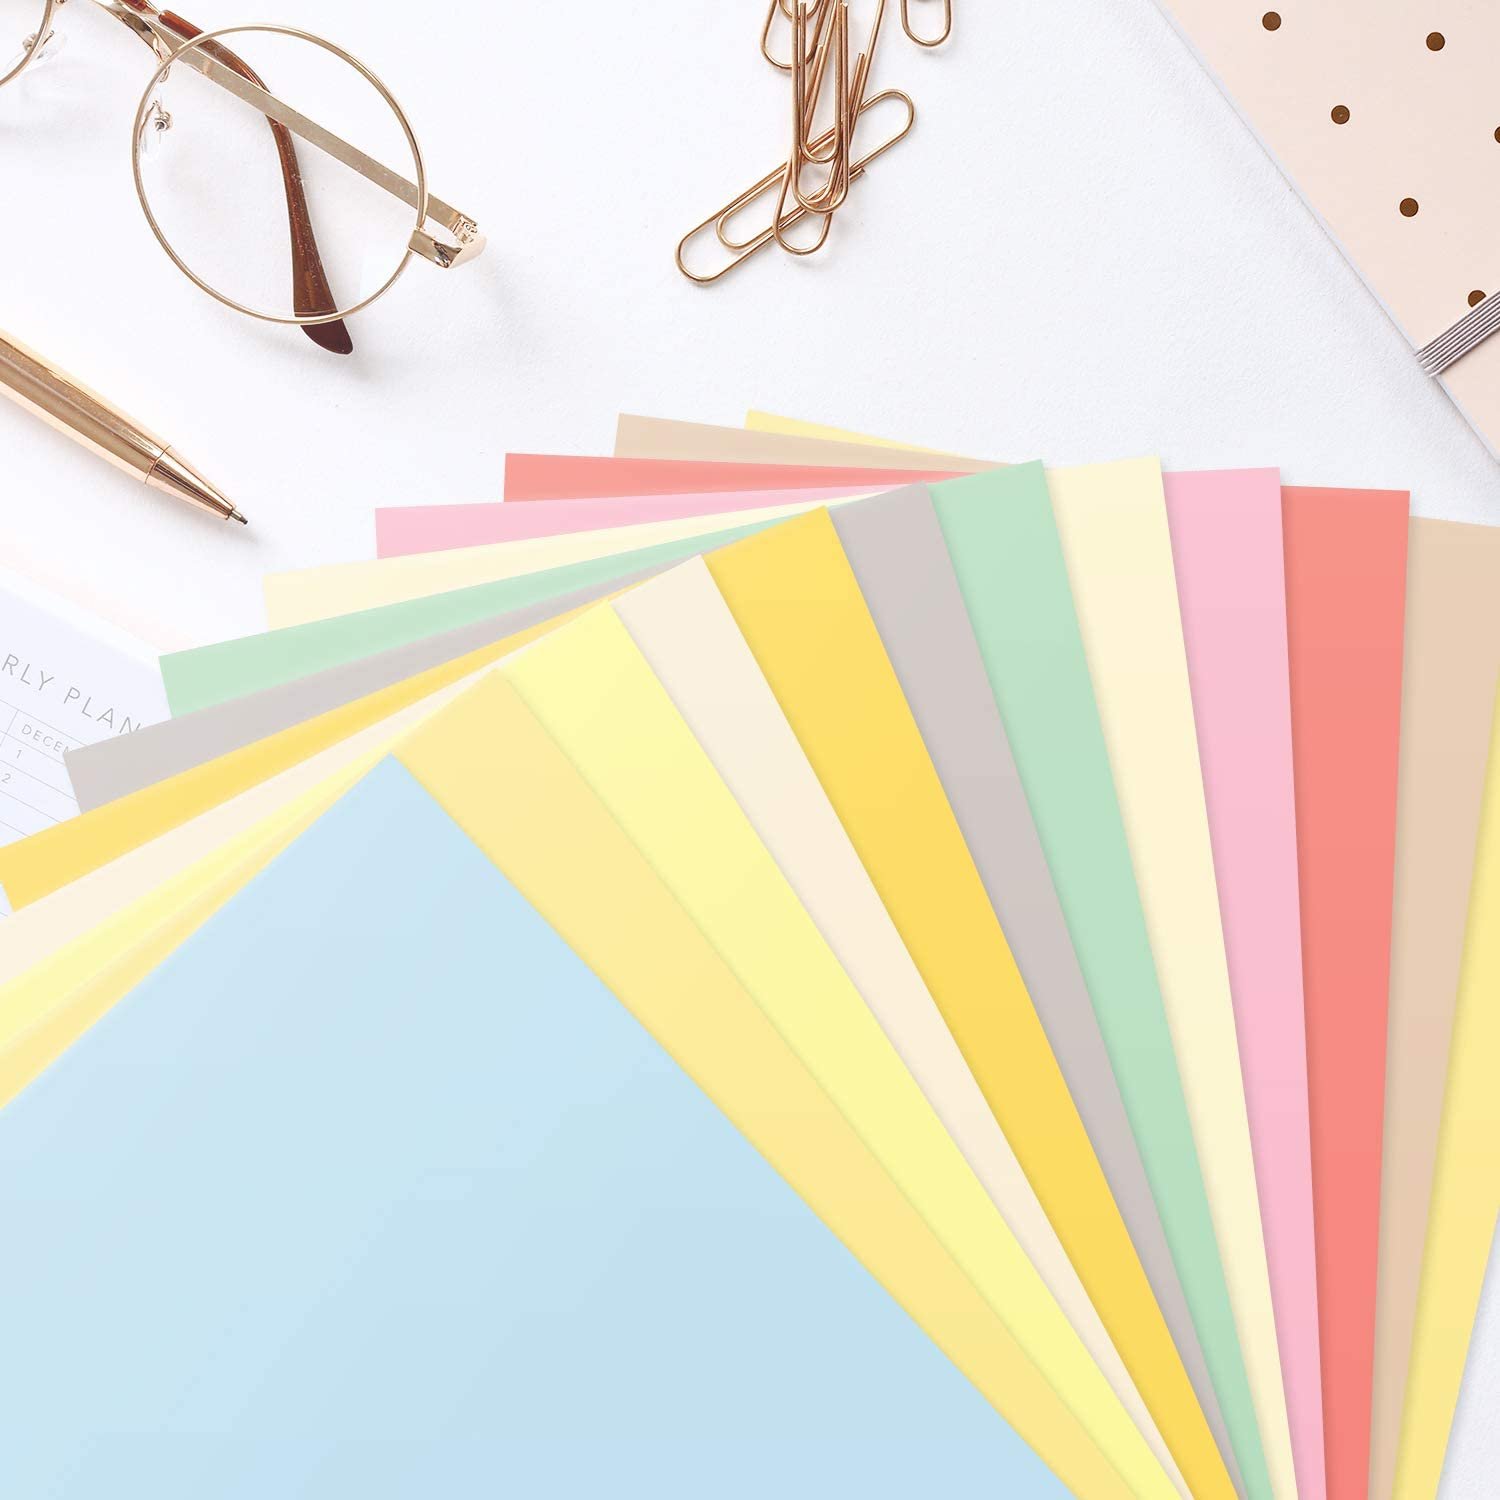 8.5 x 14” Pastel Color Paper – Great for Cards and Stationery Printing | Legal, Menu Size | Lightweight 20lb Paper | 100 Sheets | Cream - image 3 of 6